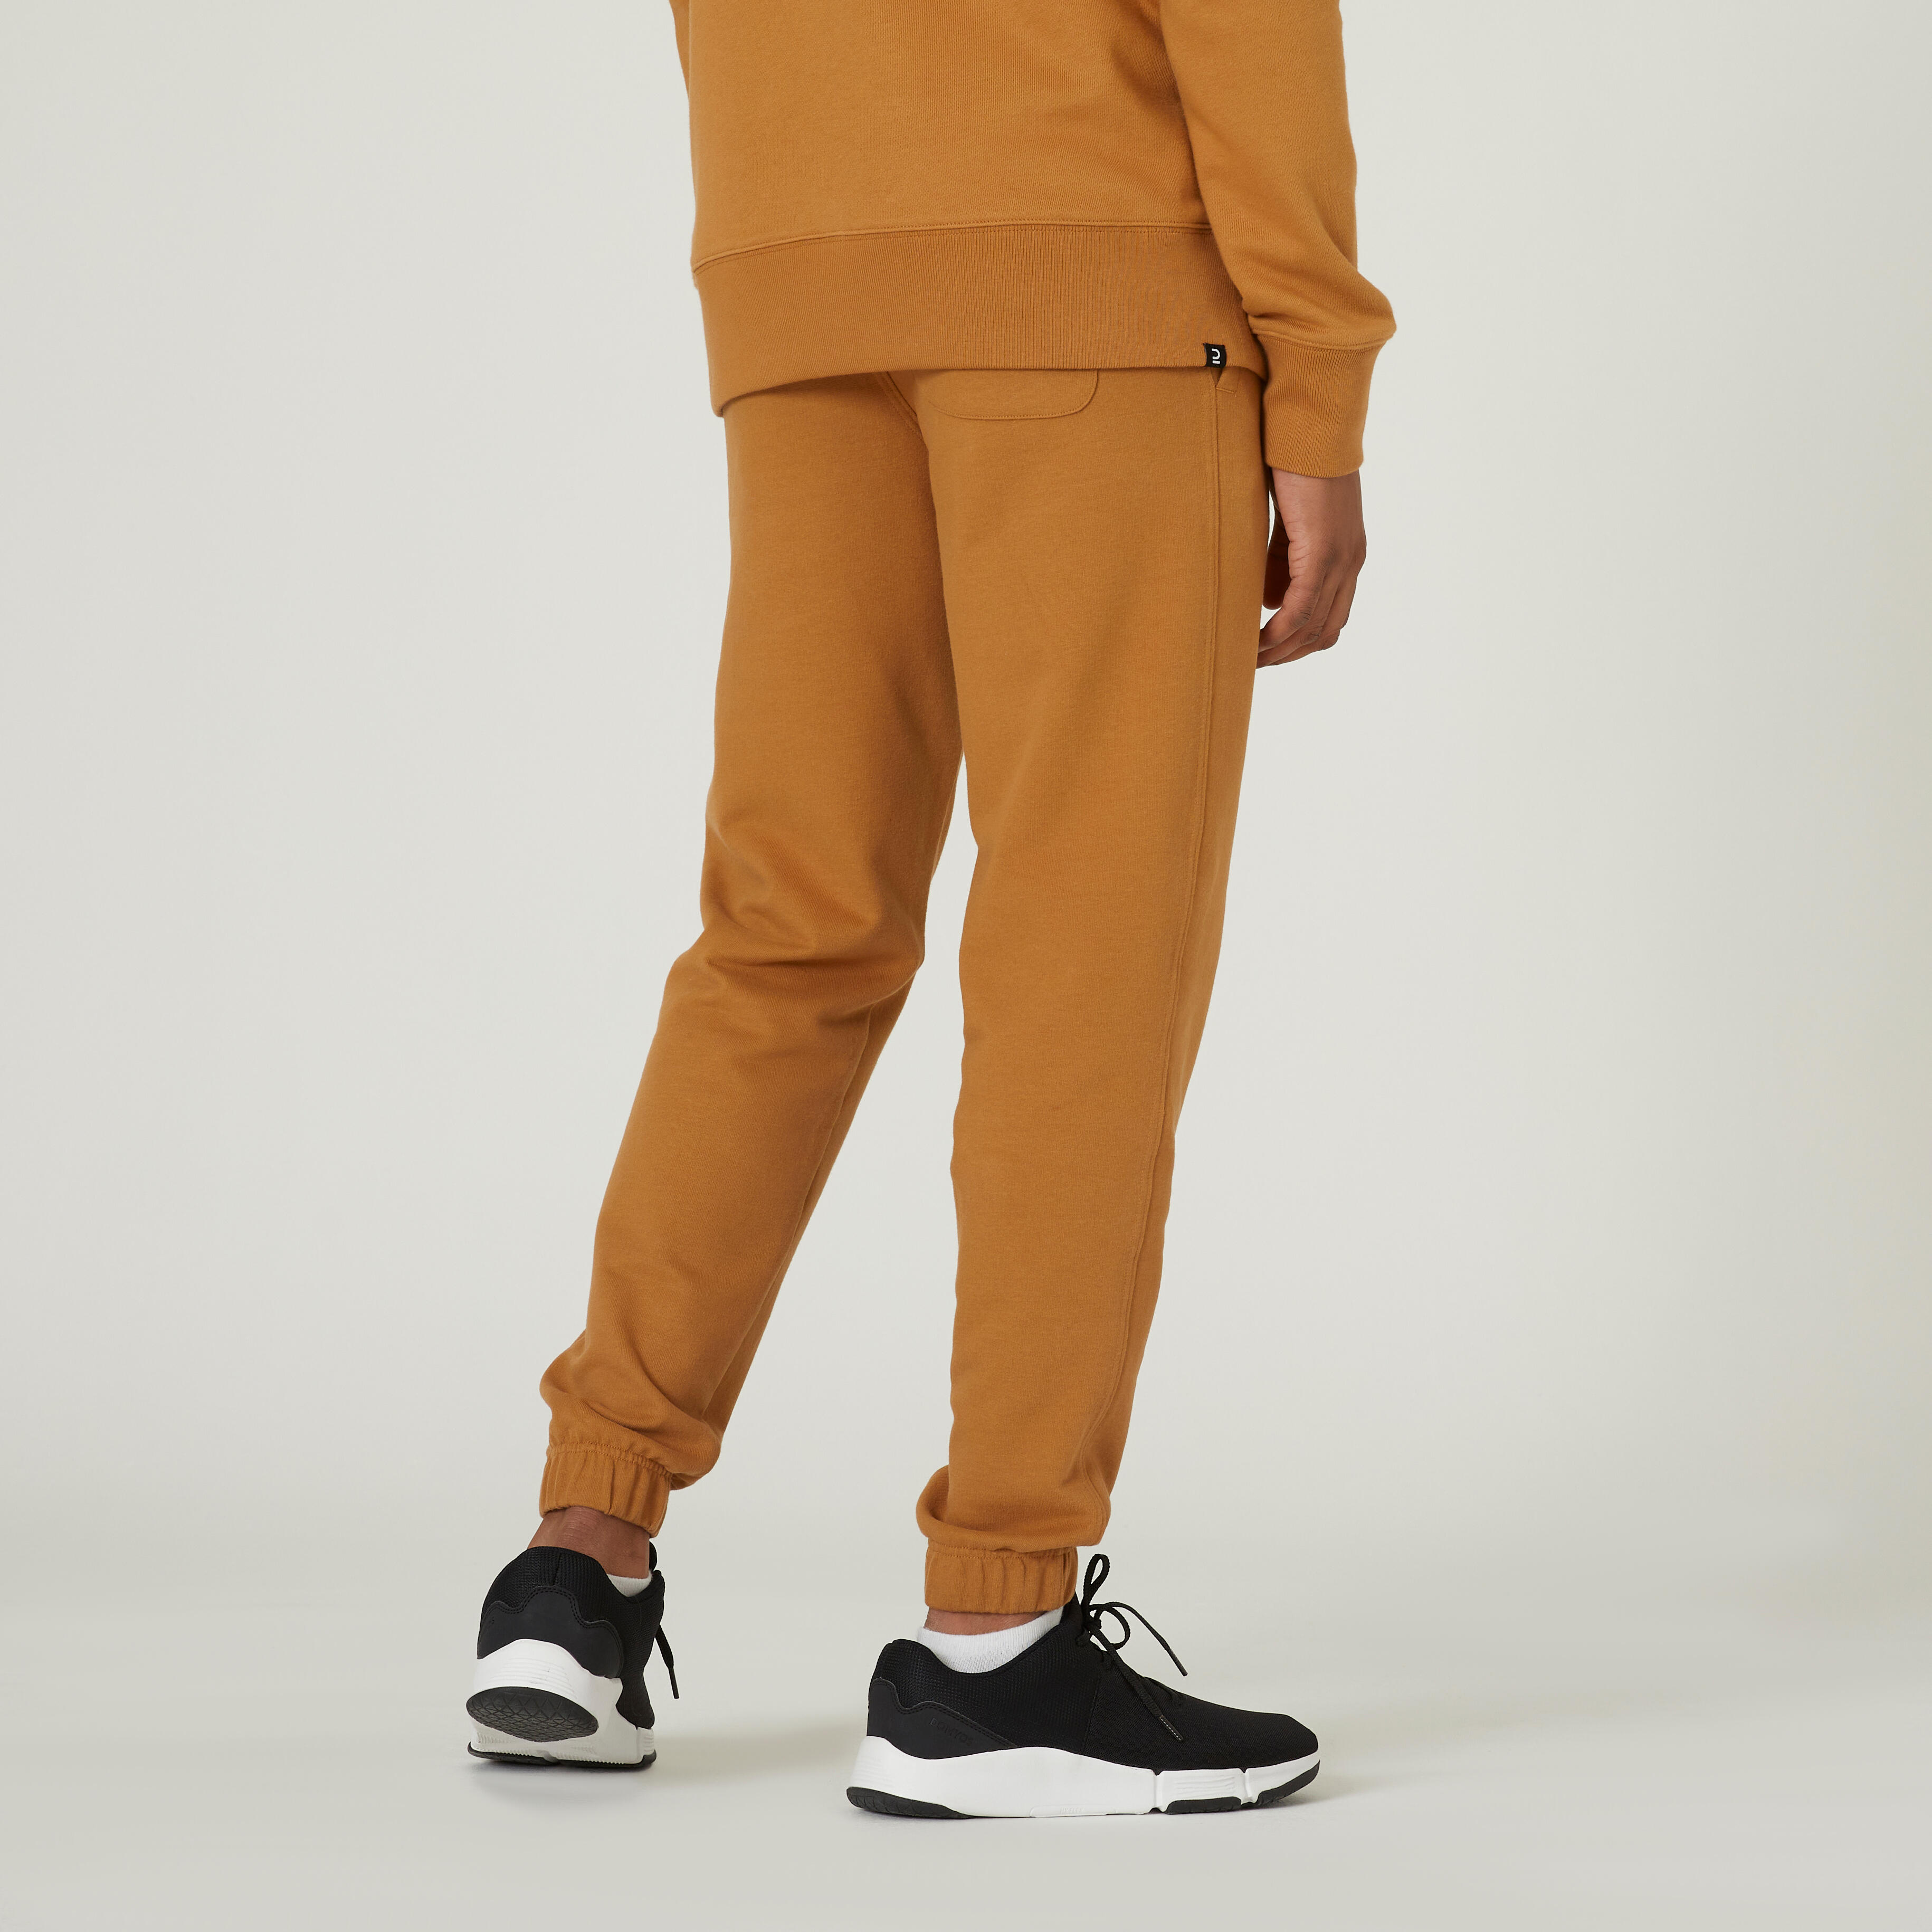 WOODLAND Joggers  Buy WOODLAND Solid Camel Brown Joggers Online  Nykaa  Fashion